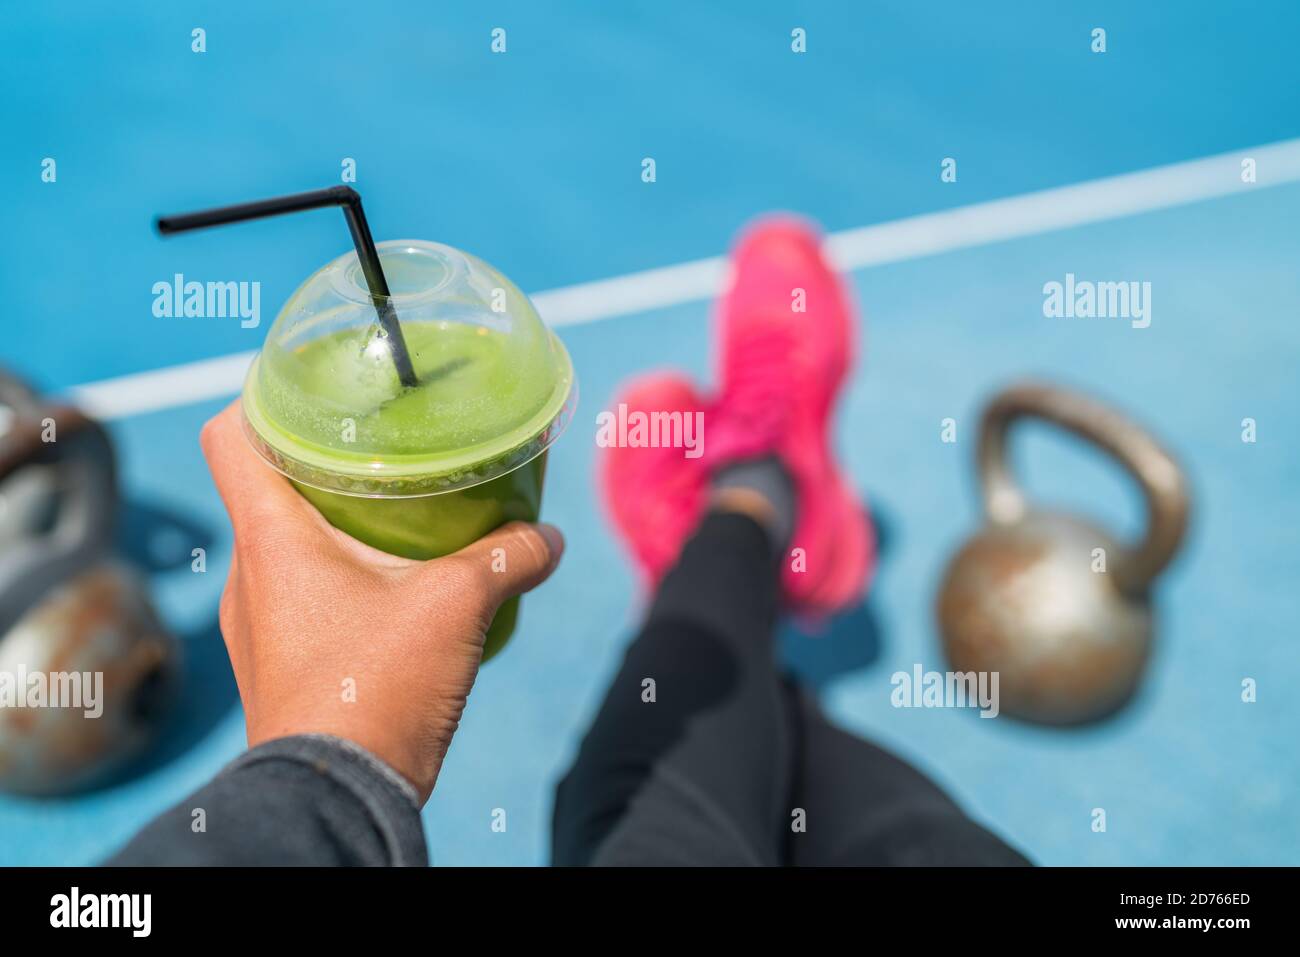 Fitness smoothie weight loss woman taking food selfie of detox green juice with kettlebells at outdoor training gym. Hand holding plastic cup of Stock Photo